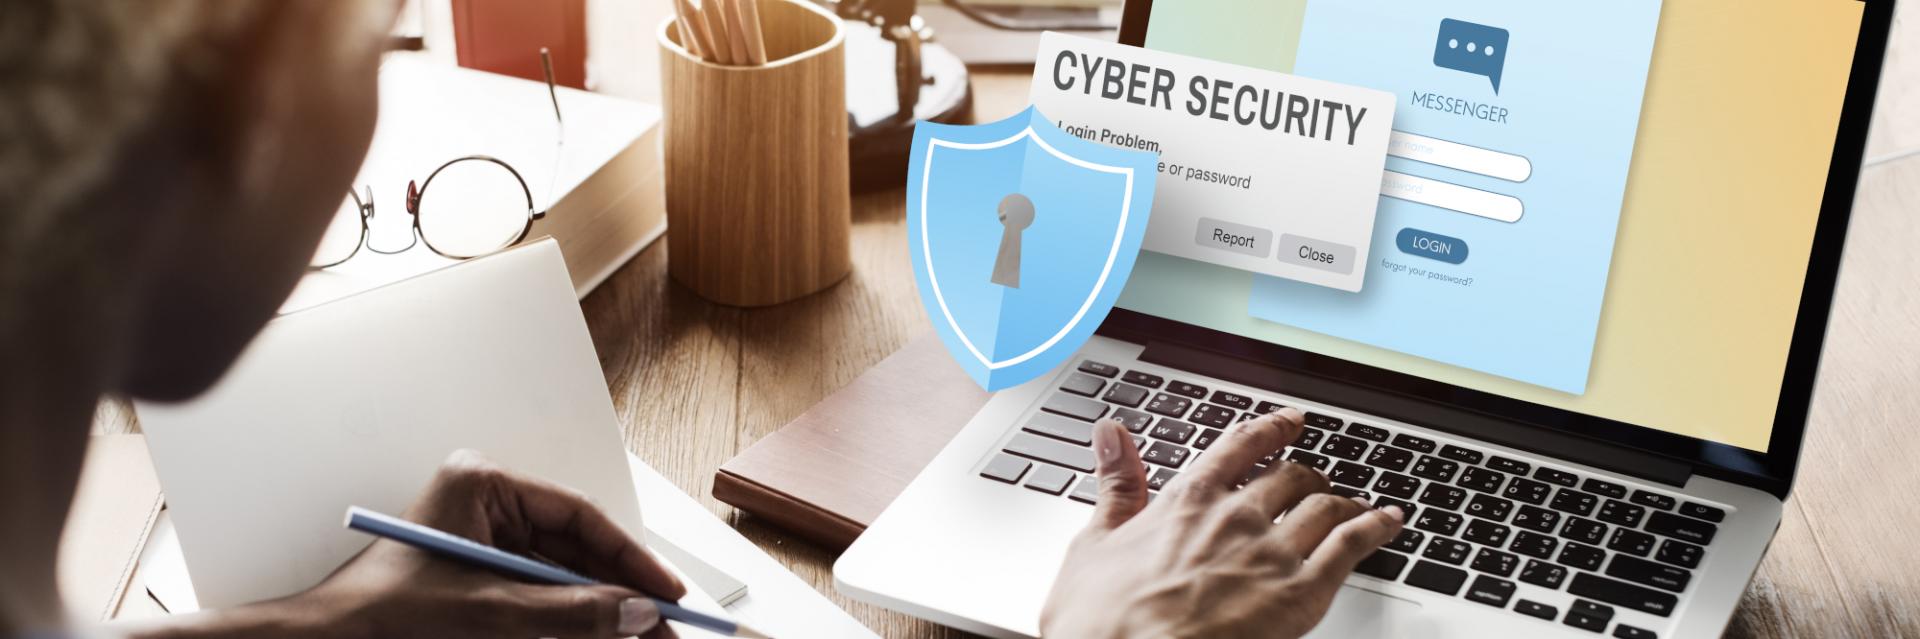 ECA cyber security week launched